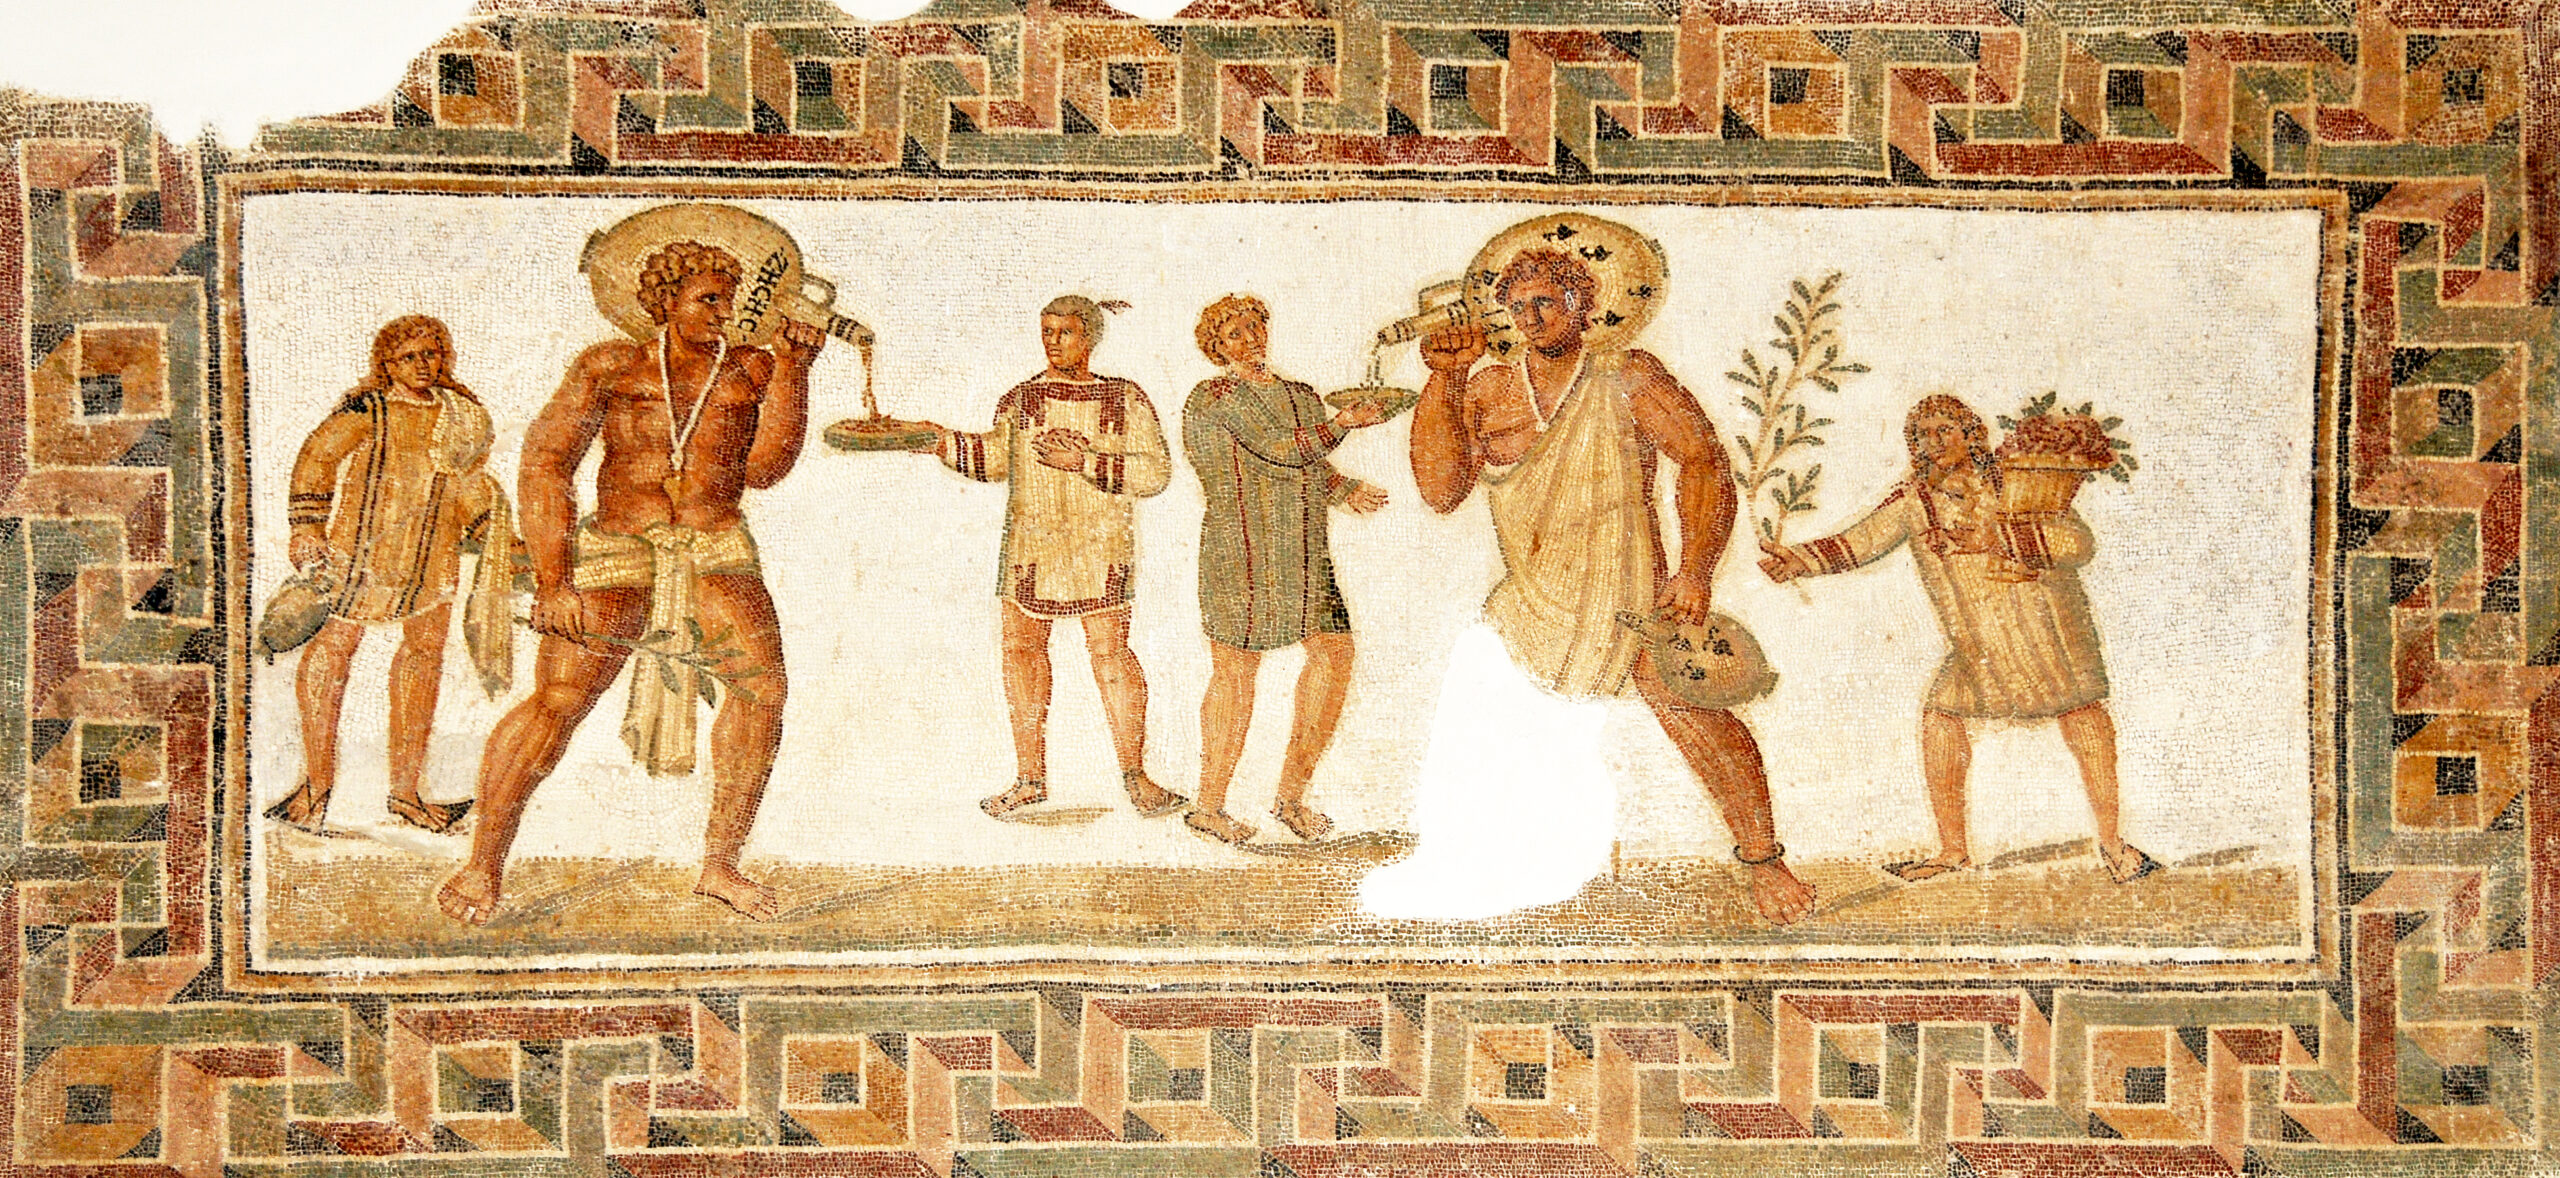 Roman slaves depicted in a mosaic